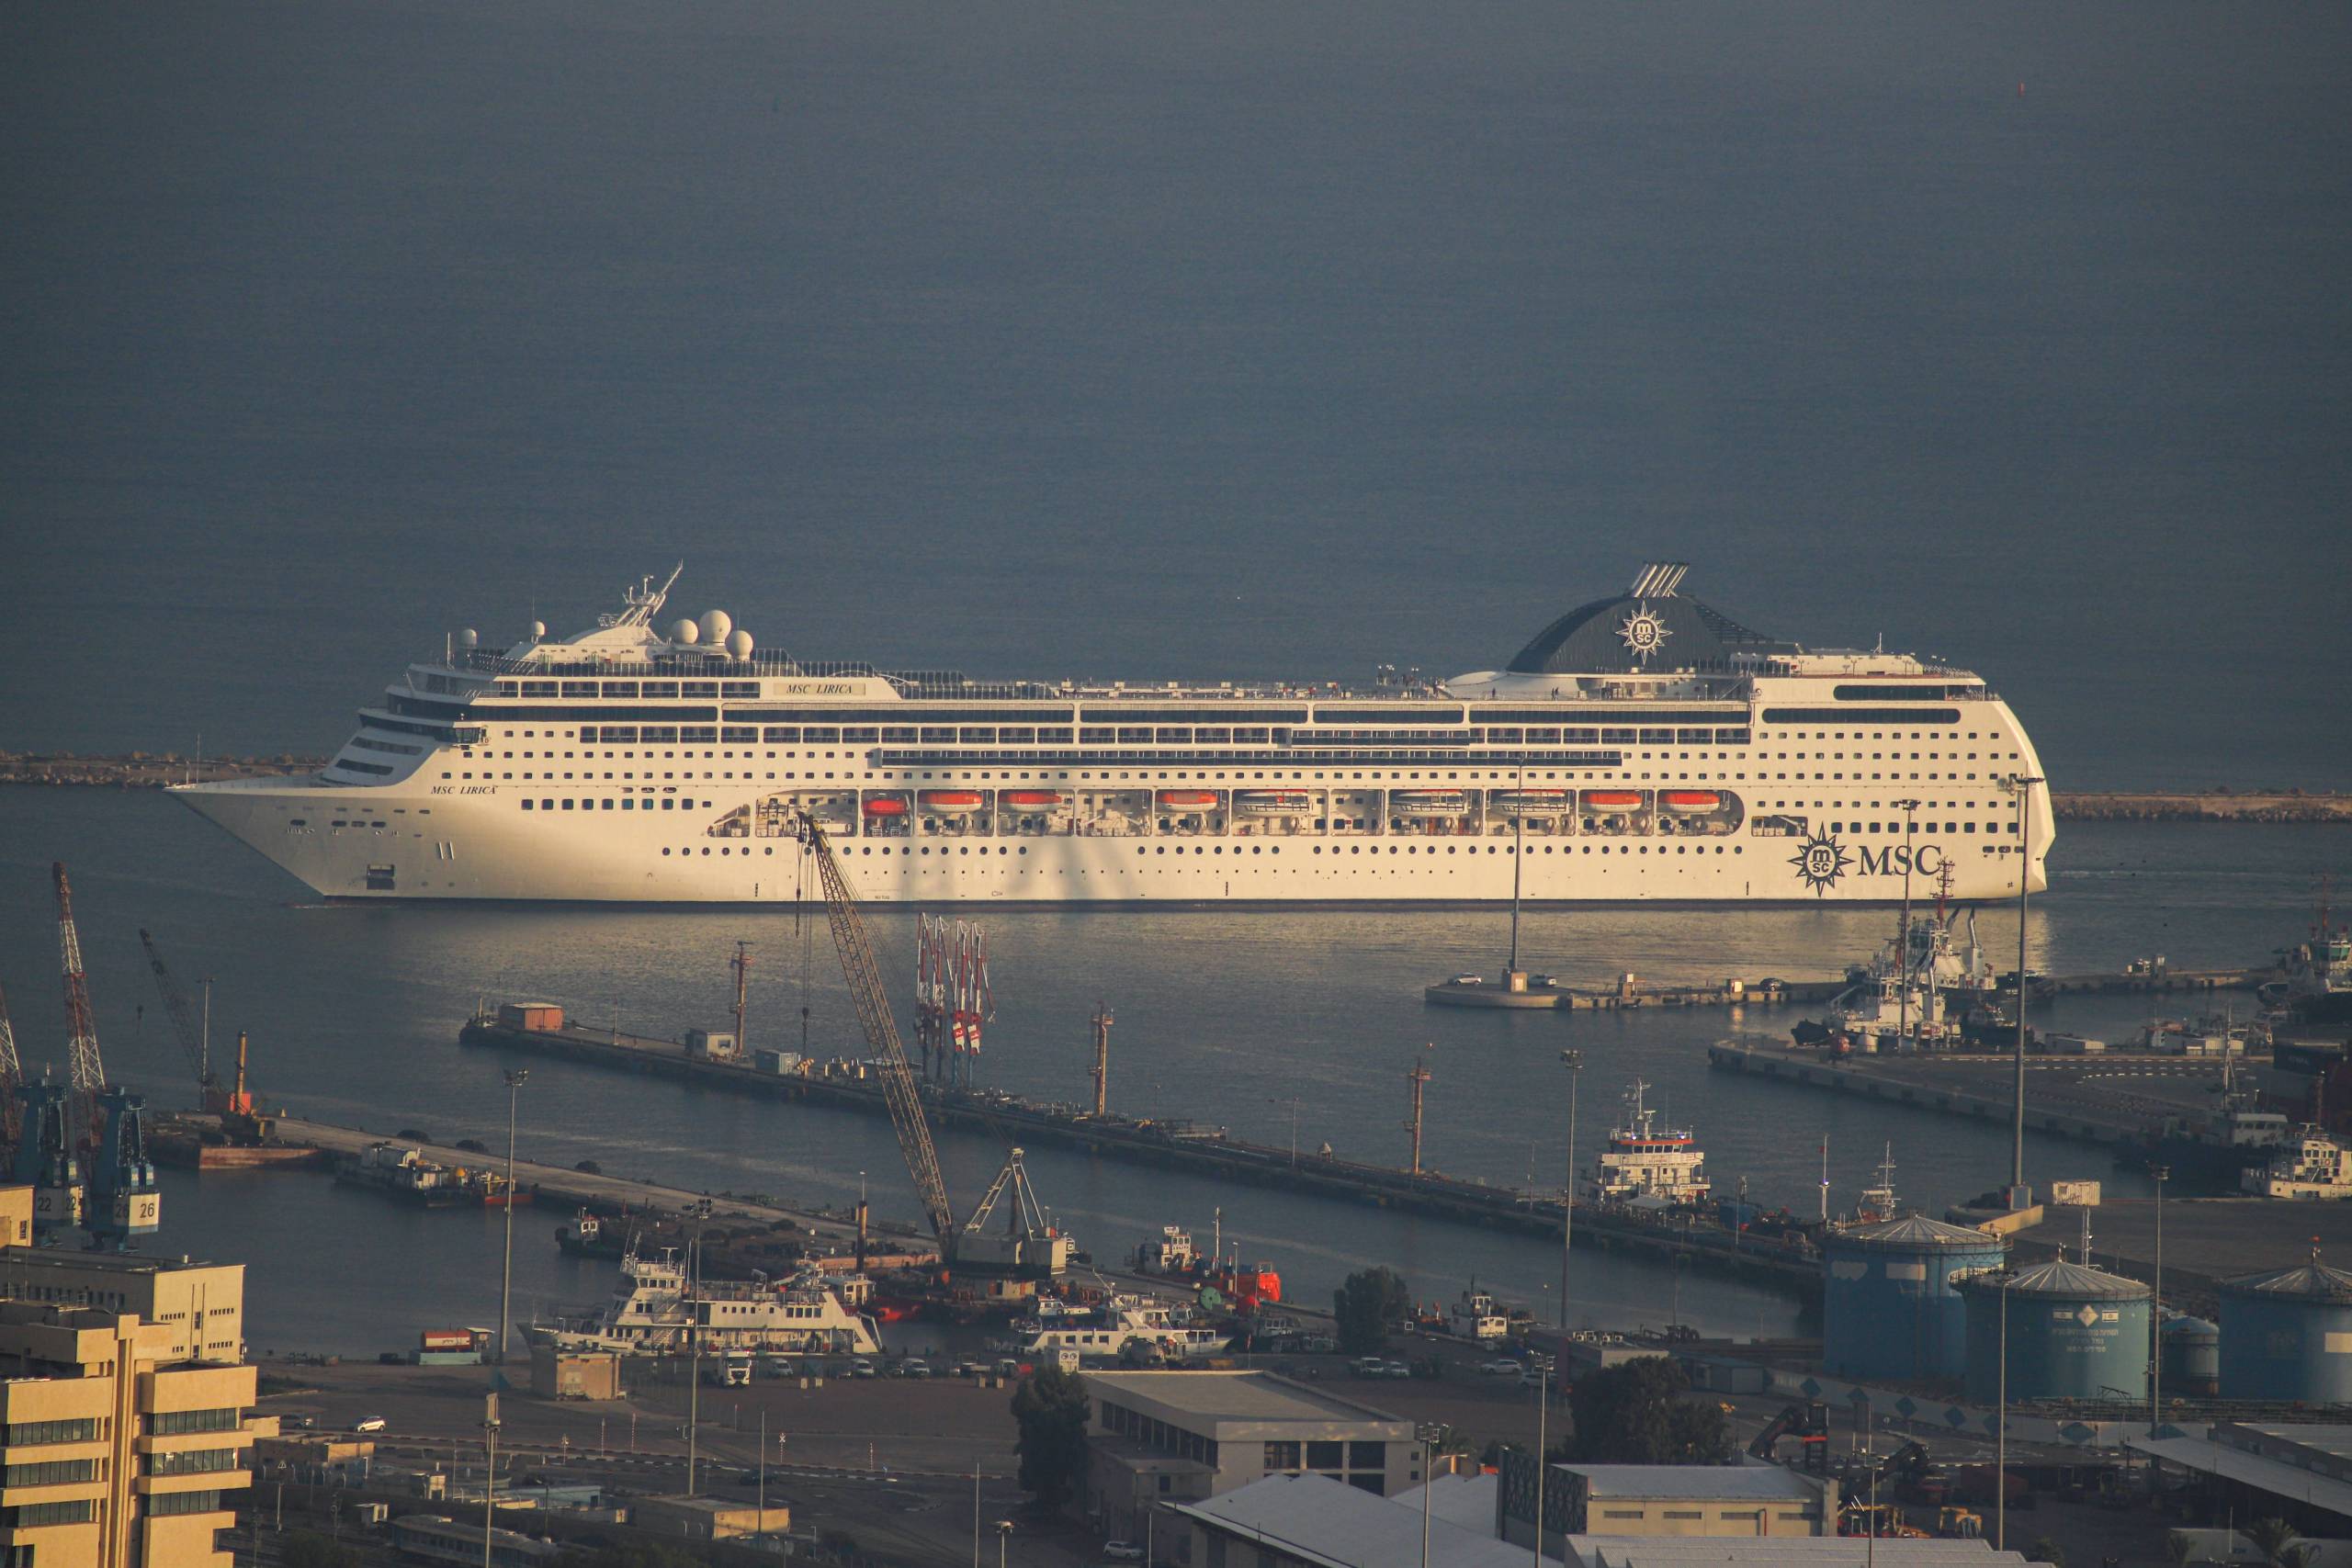 MSC Lirica, the cruise ship owned and operated by MSC Cruises